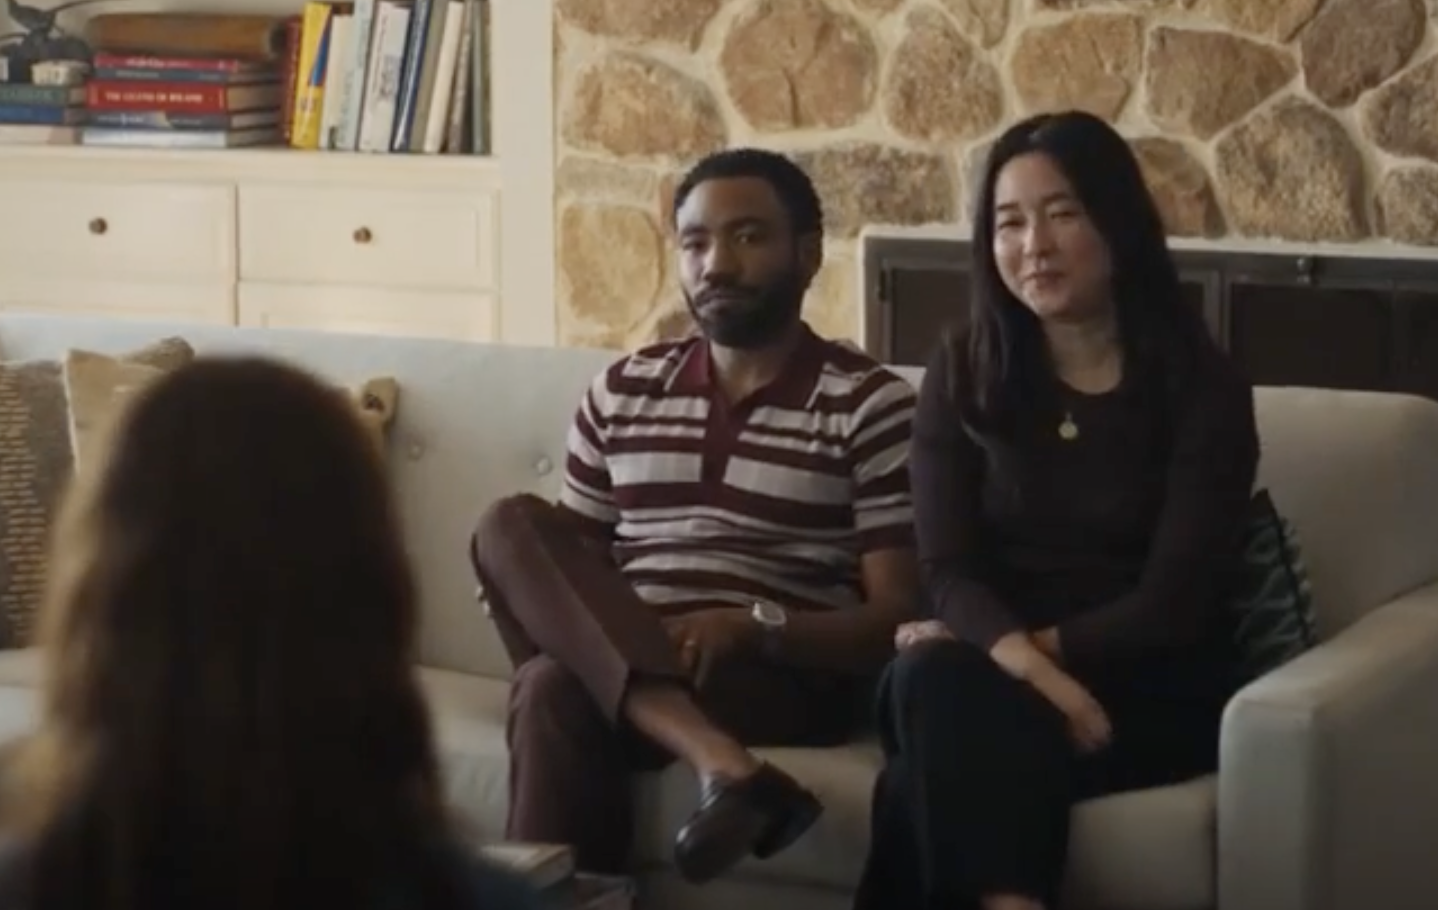 Prime Video Renews 'Mr. & Mrs. Smith' For A Second Season , Donald Glover And Maya Erskine Not Expected to Return